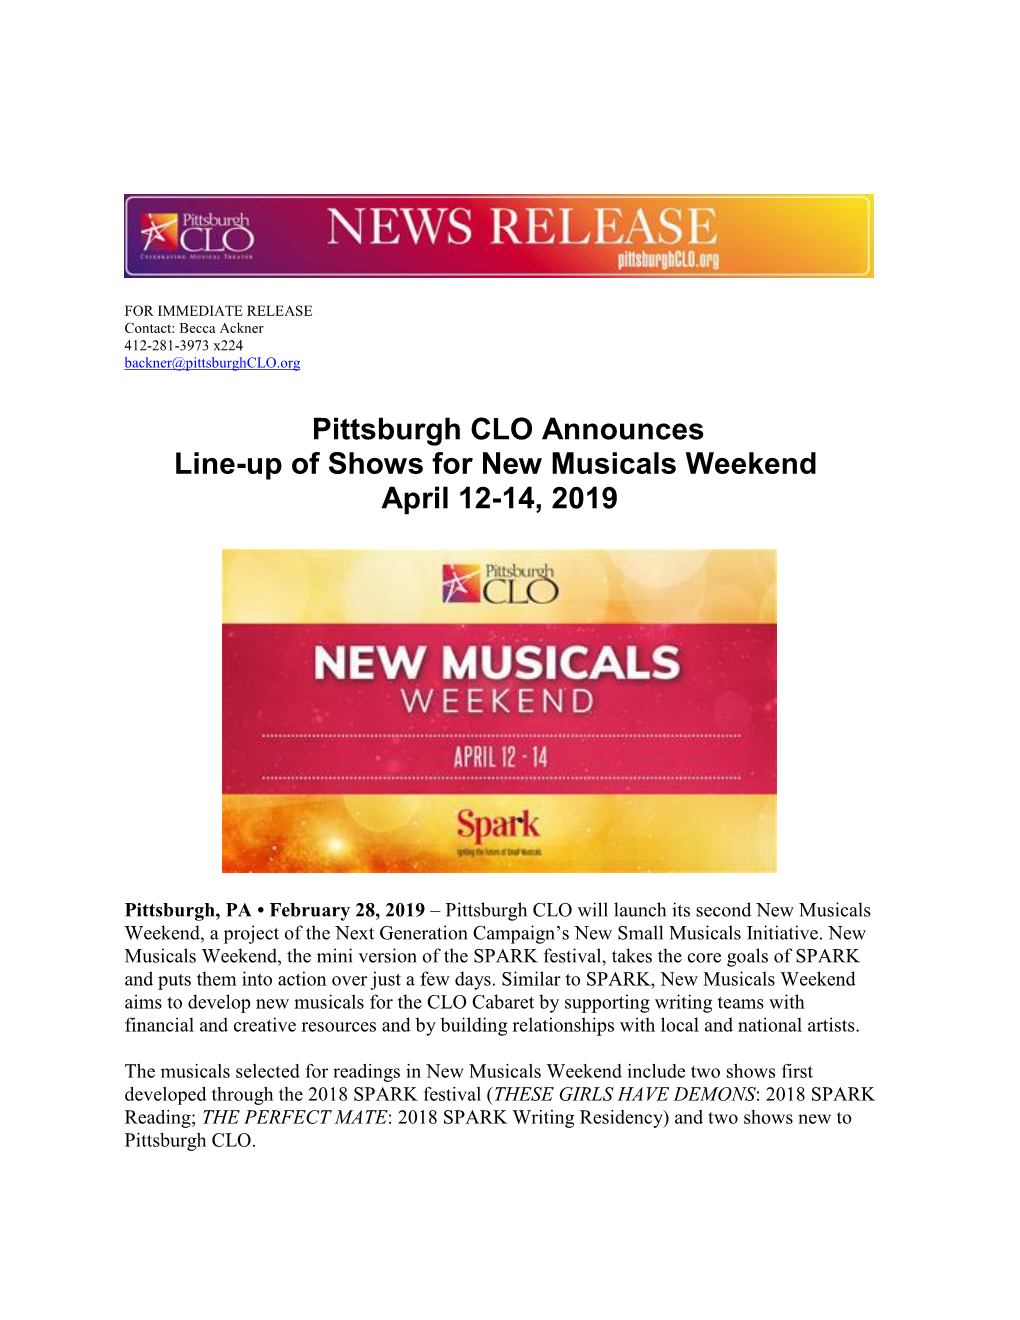 Pittsburgh CLO Announces Line-Up of Shows for New Musicals Weekend April 12-14, 2019